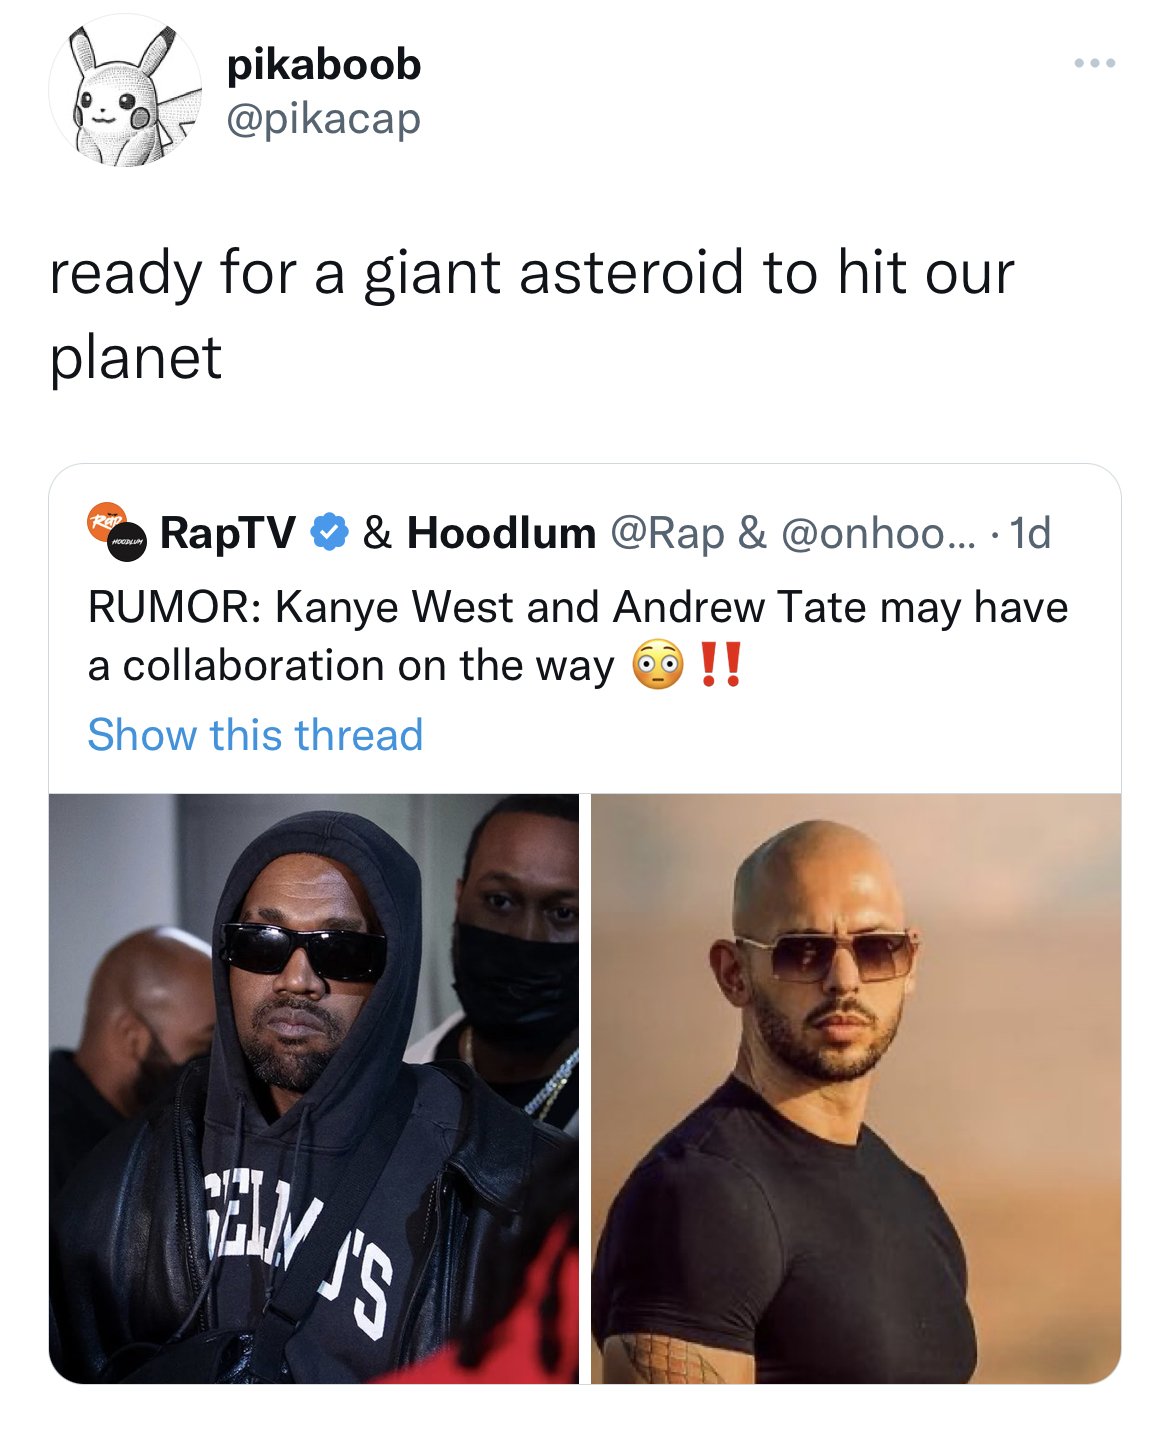 celeb roasts of the week - sunglasses - pikaboob ready for a giant asteroid to hit our planet RapTV & Hoodlum & .... 1d Rumor Kanye West and Andrew Tate may have a collaboration on the way Show this thread Emis B